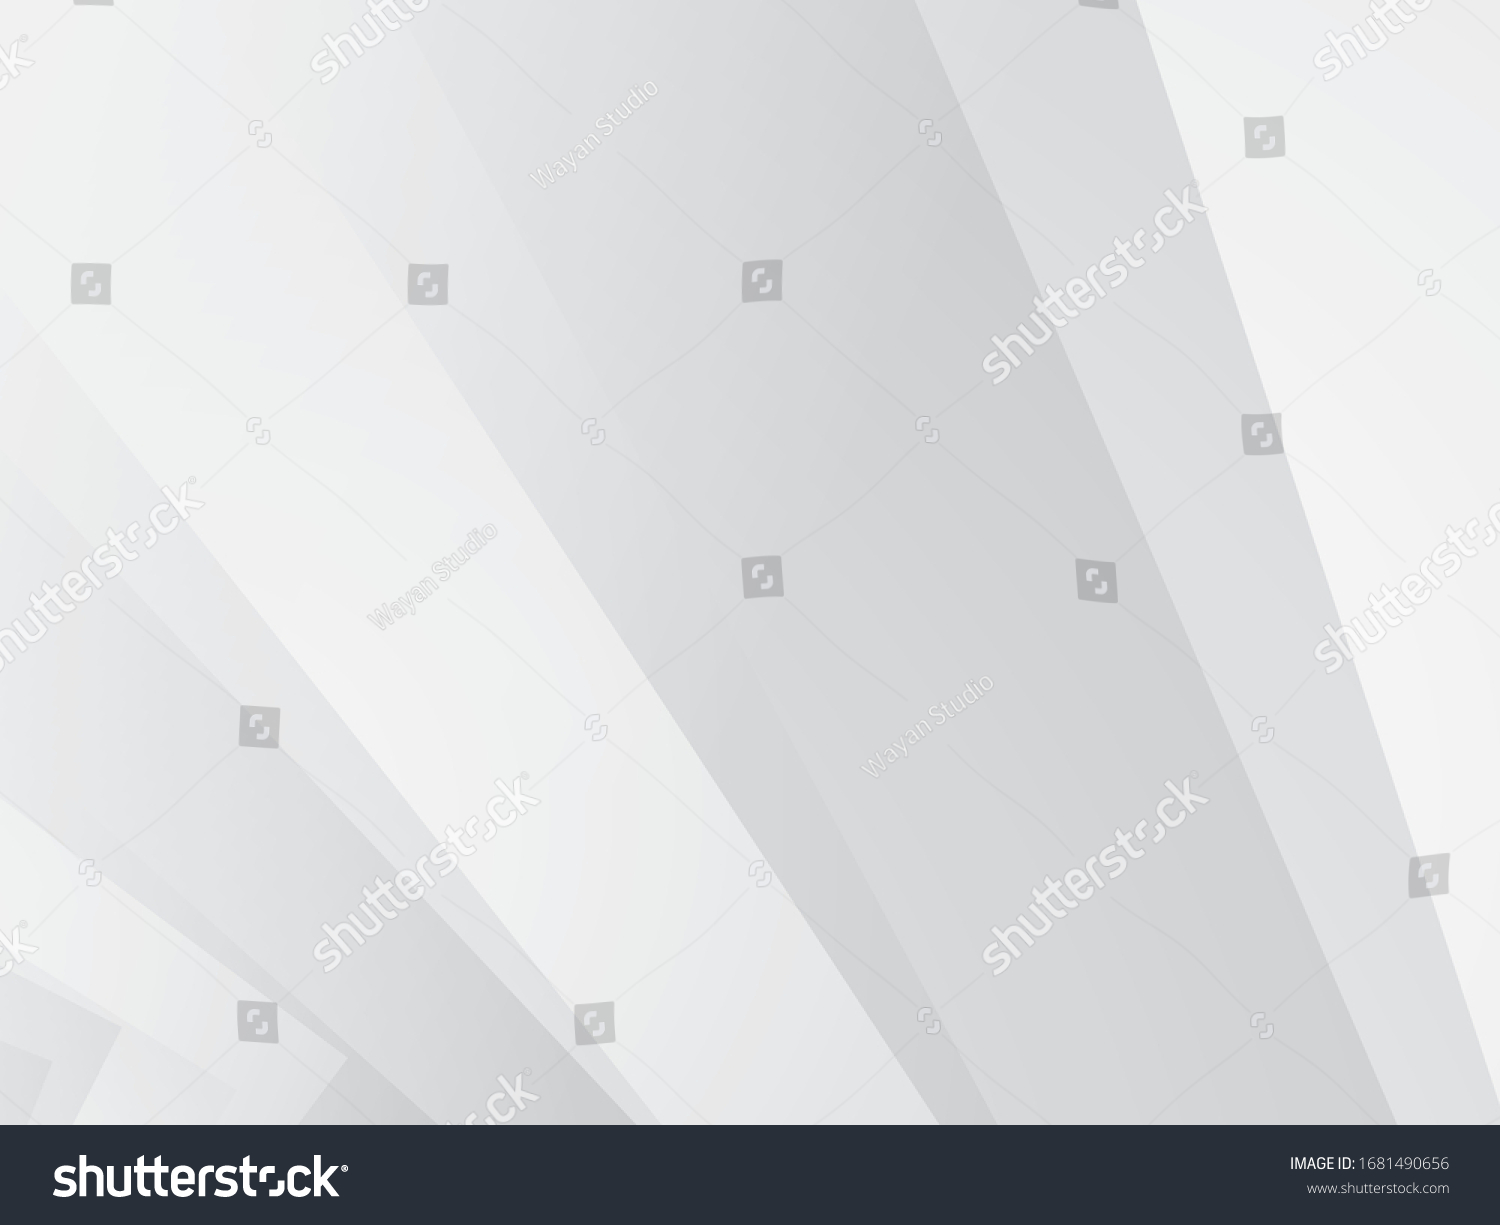 White Background Abstract Geometric Vector Illustration.
You can use this white background template for website user interface. #1681490656